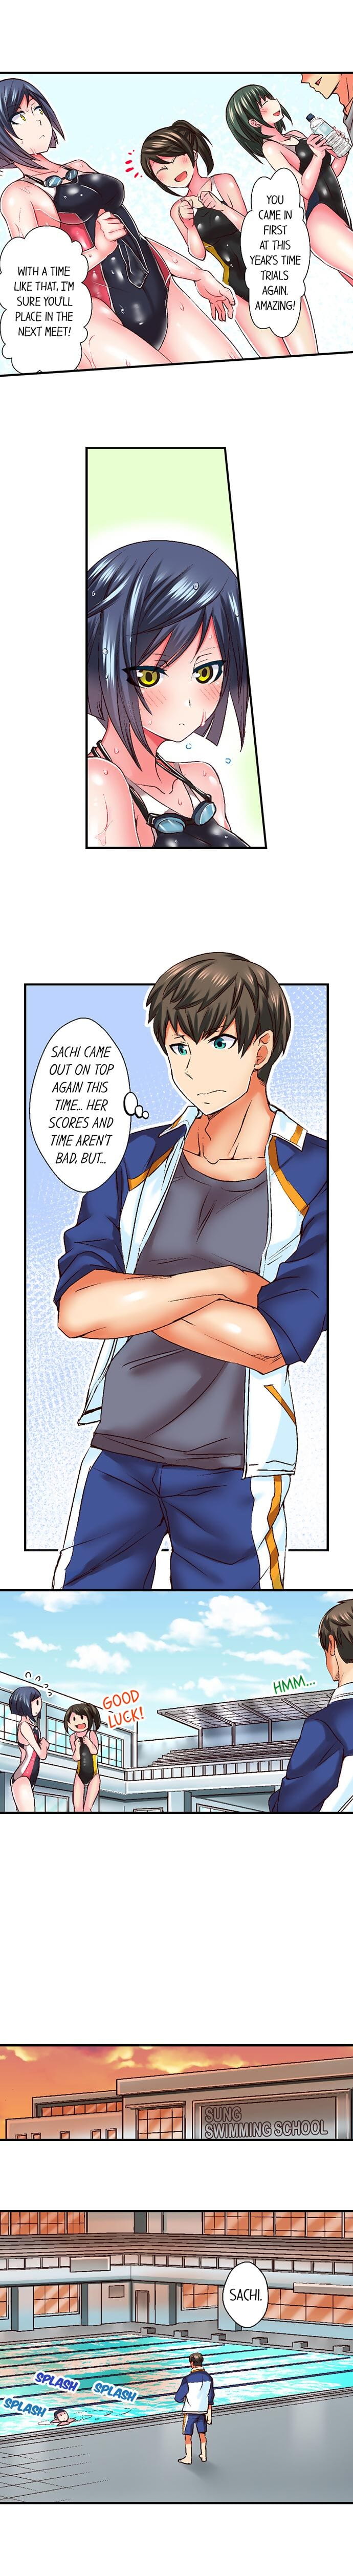 Athletes Strong Sex Drive Ch. 1 - 6 page 1